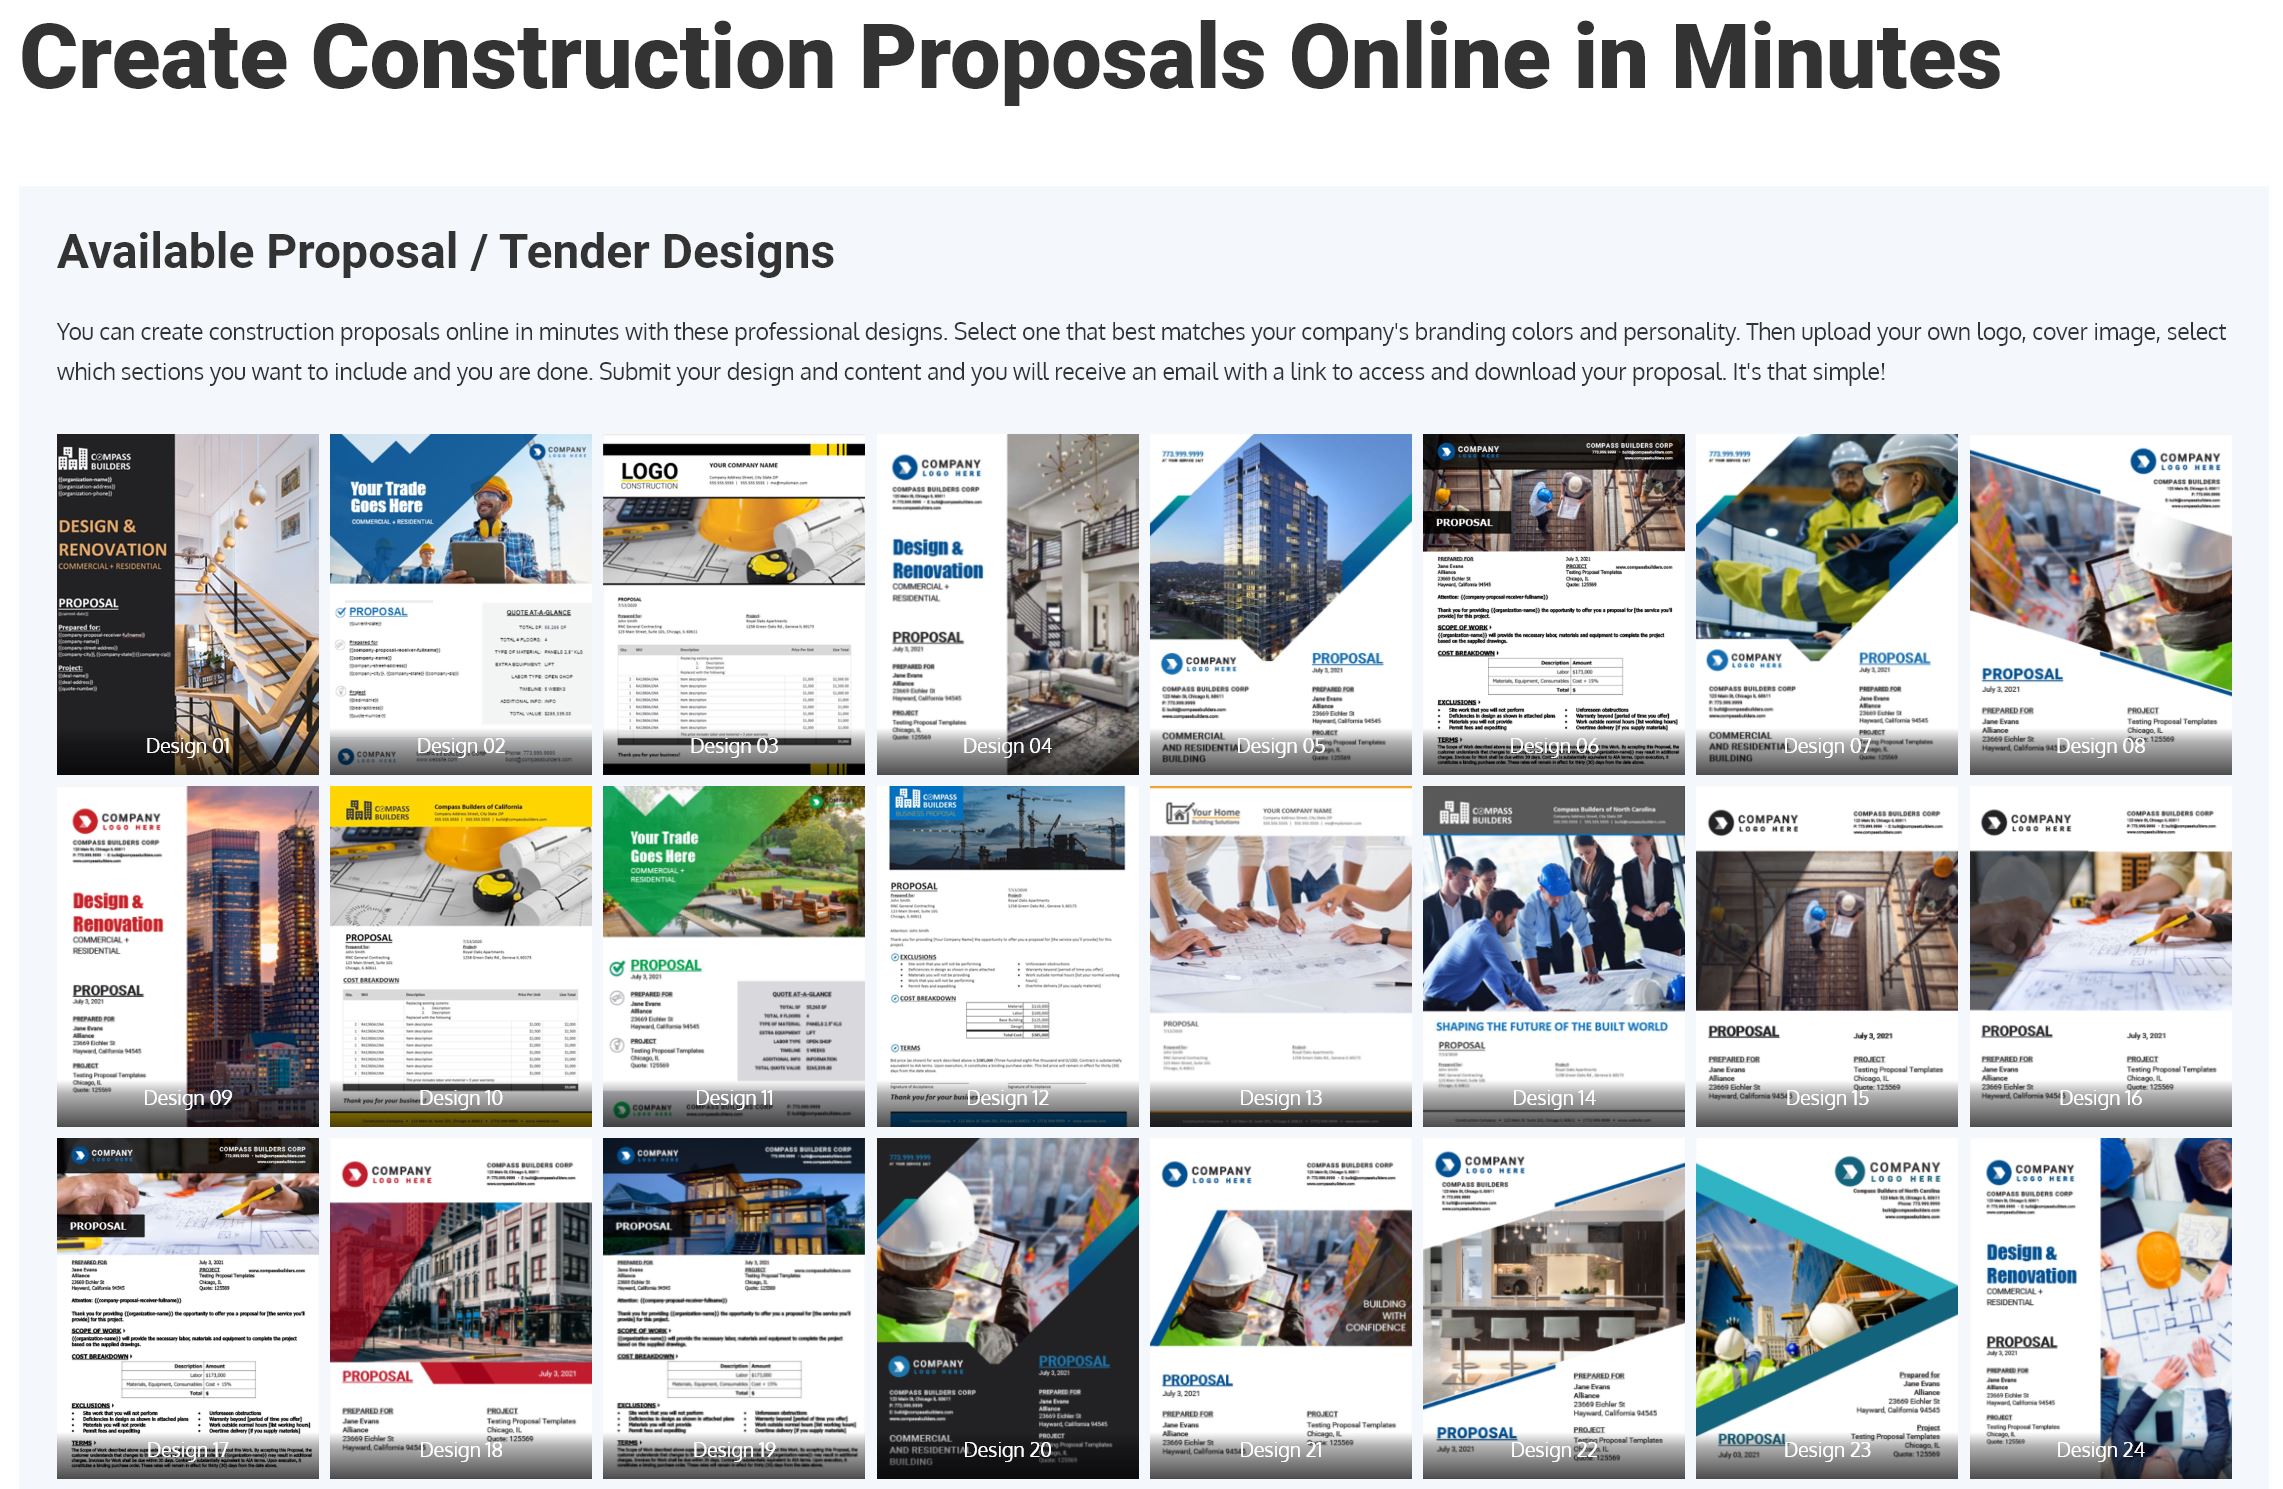 Create Construction Proposals Online in Minutes